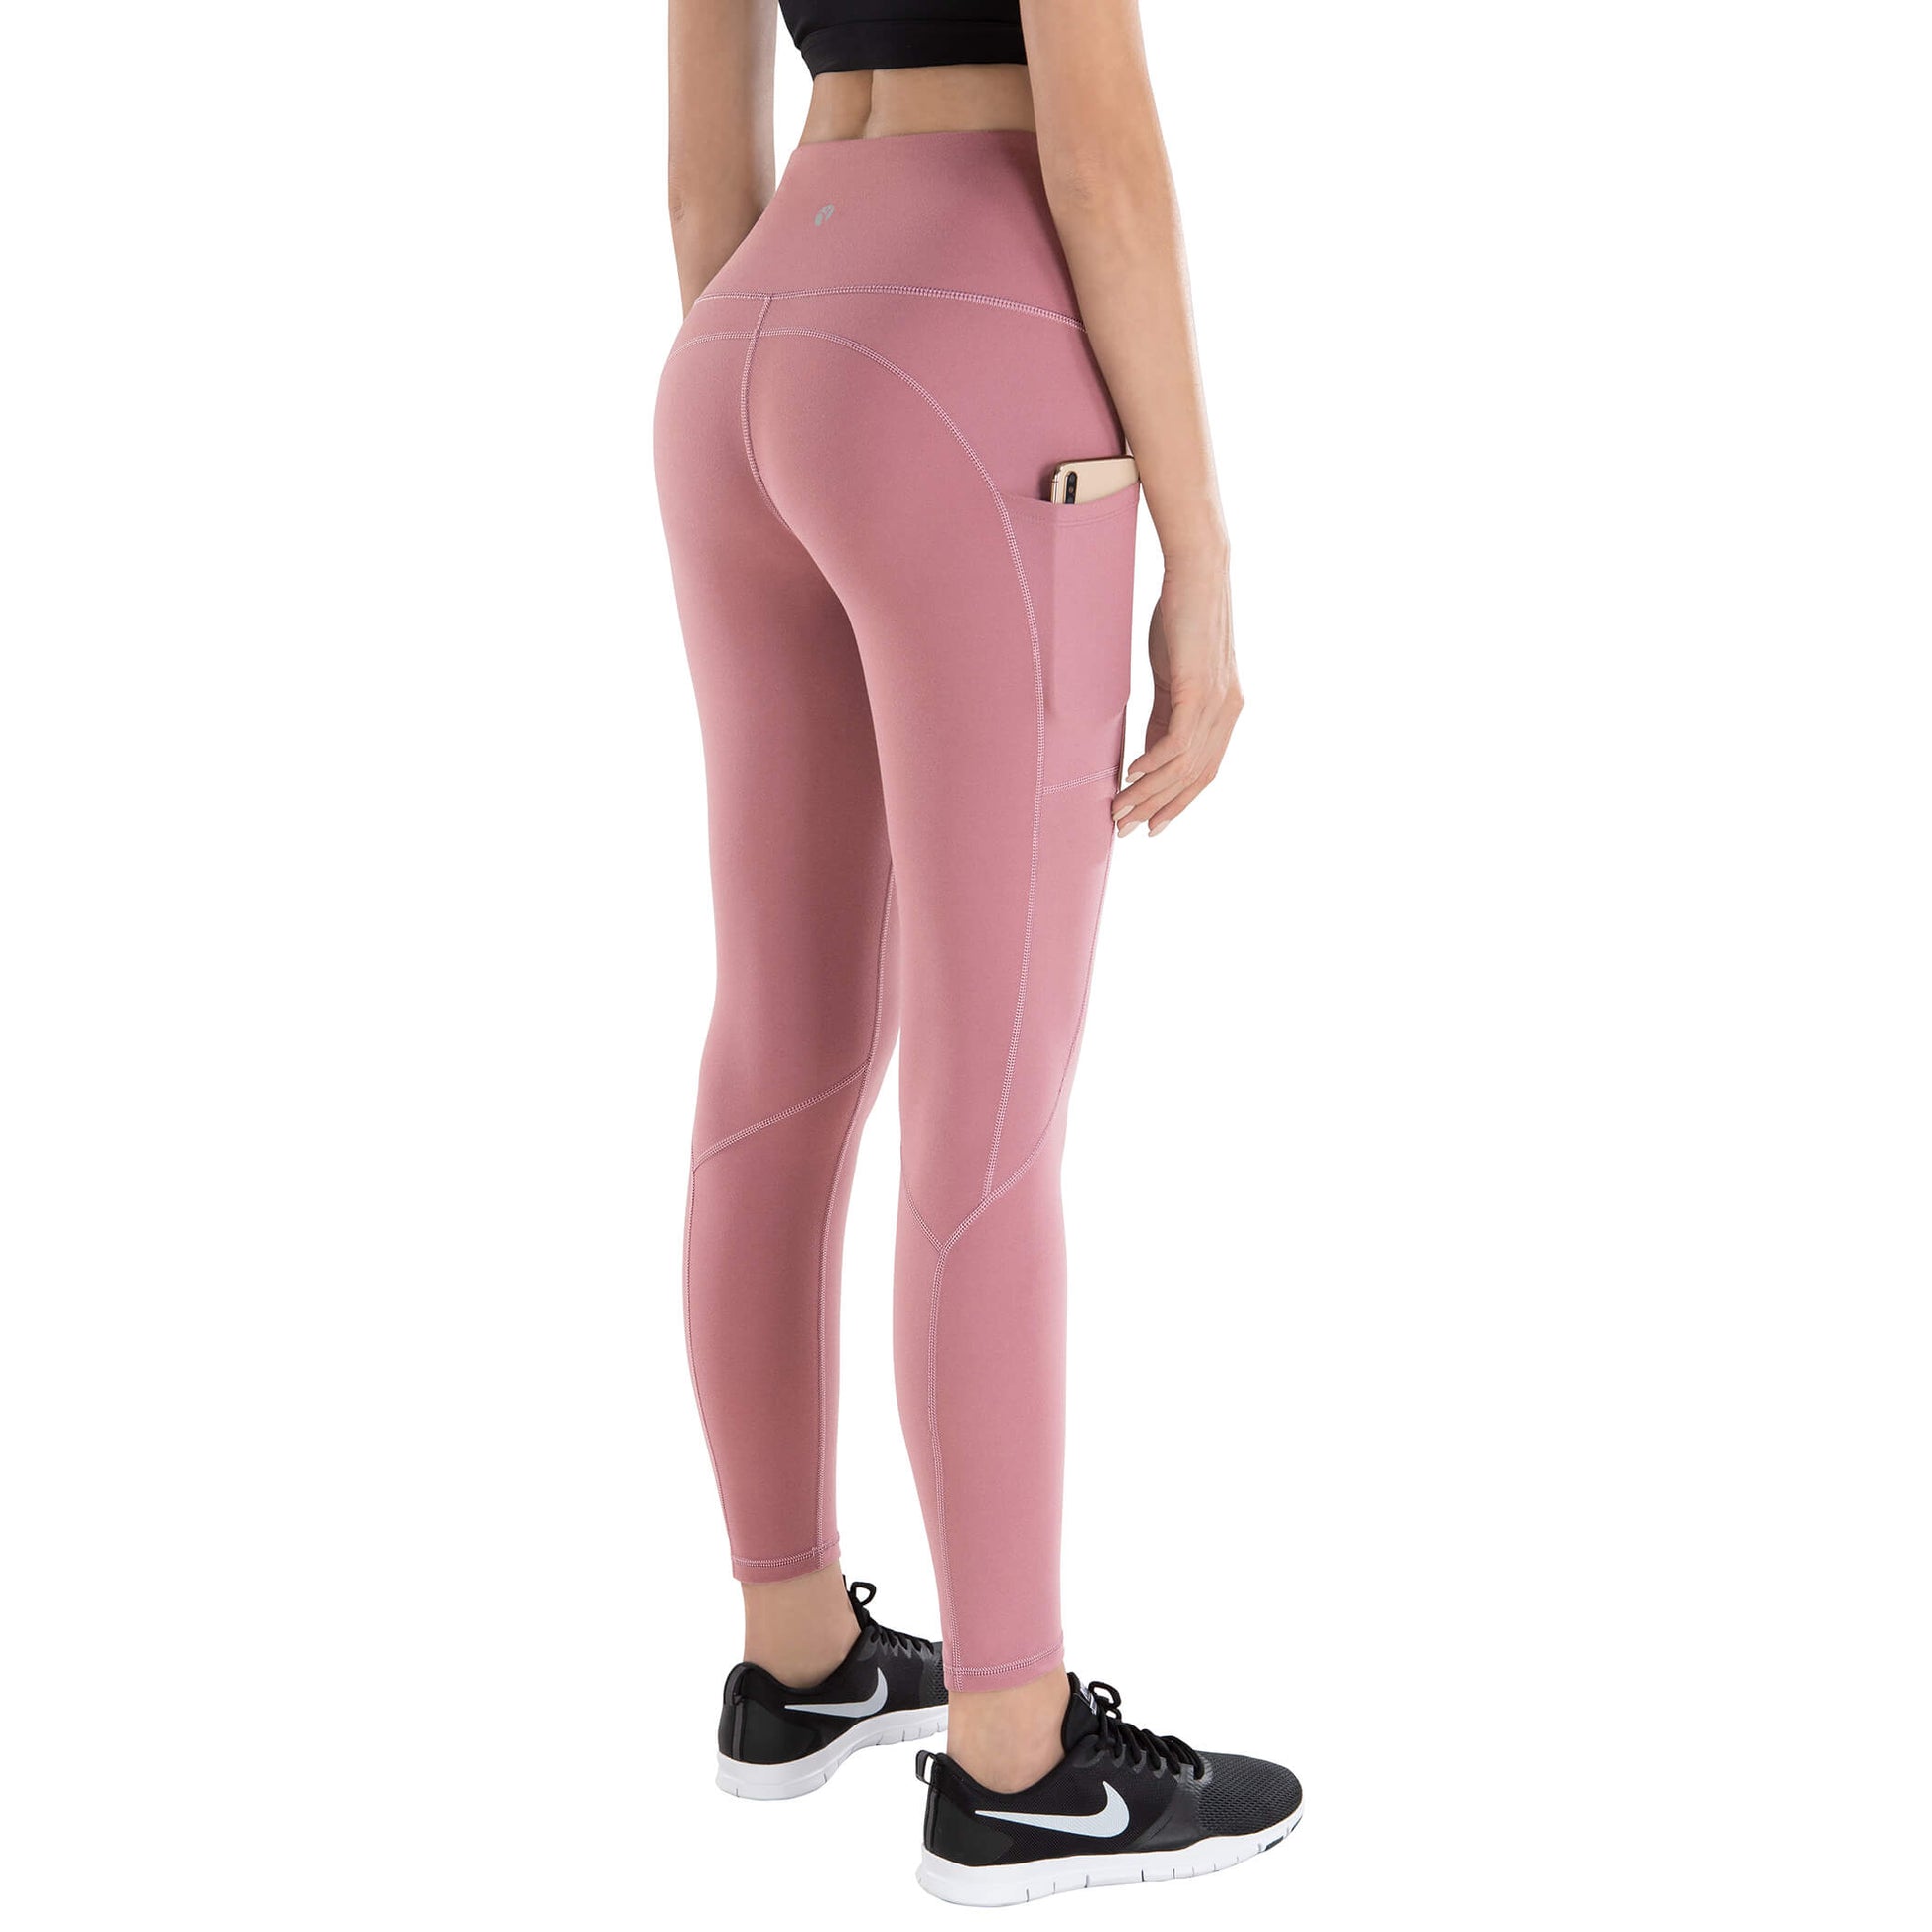 leggings for women high waisted with pockets pack : LifeSky Yoga Pants with  Pockets, High Wai